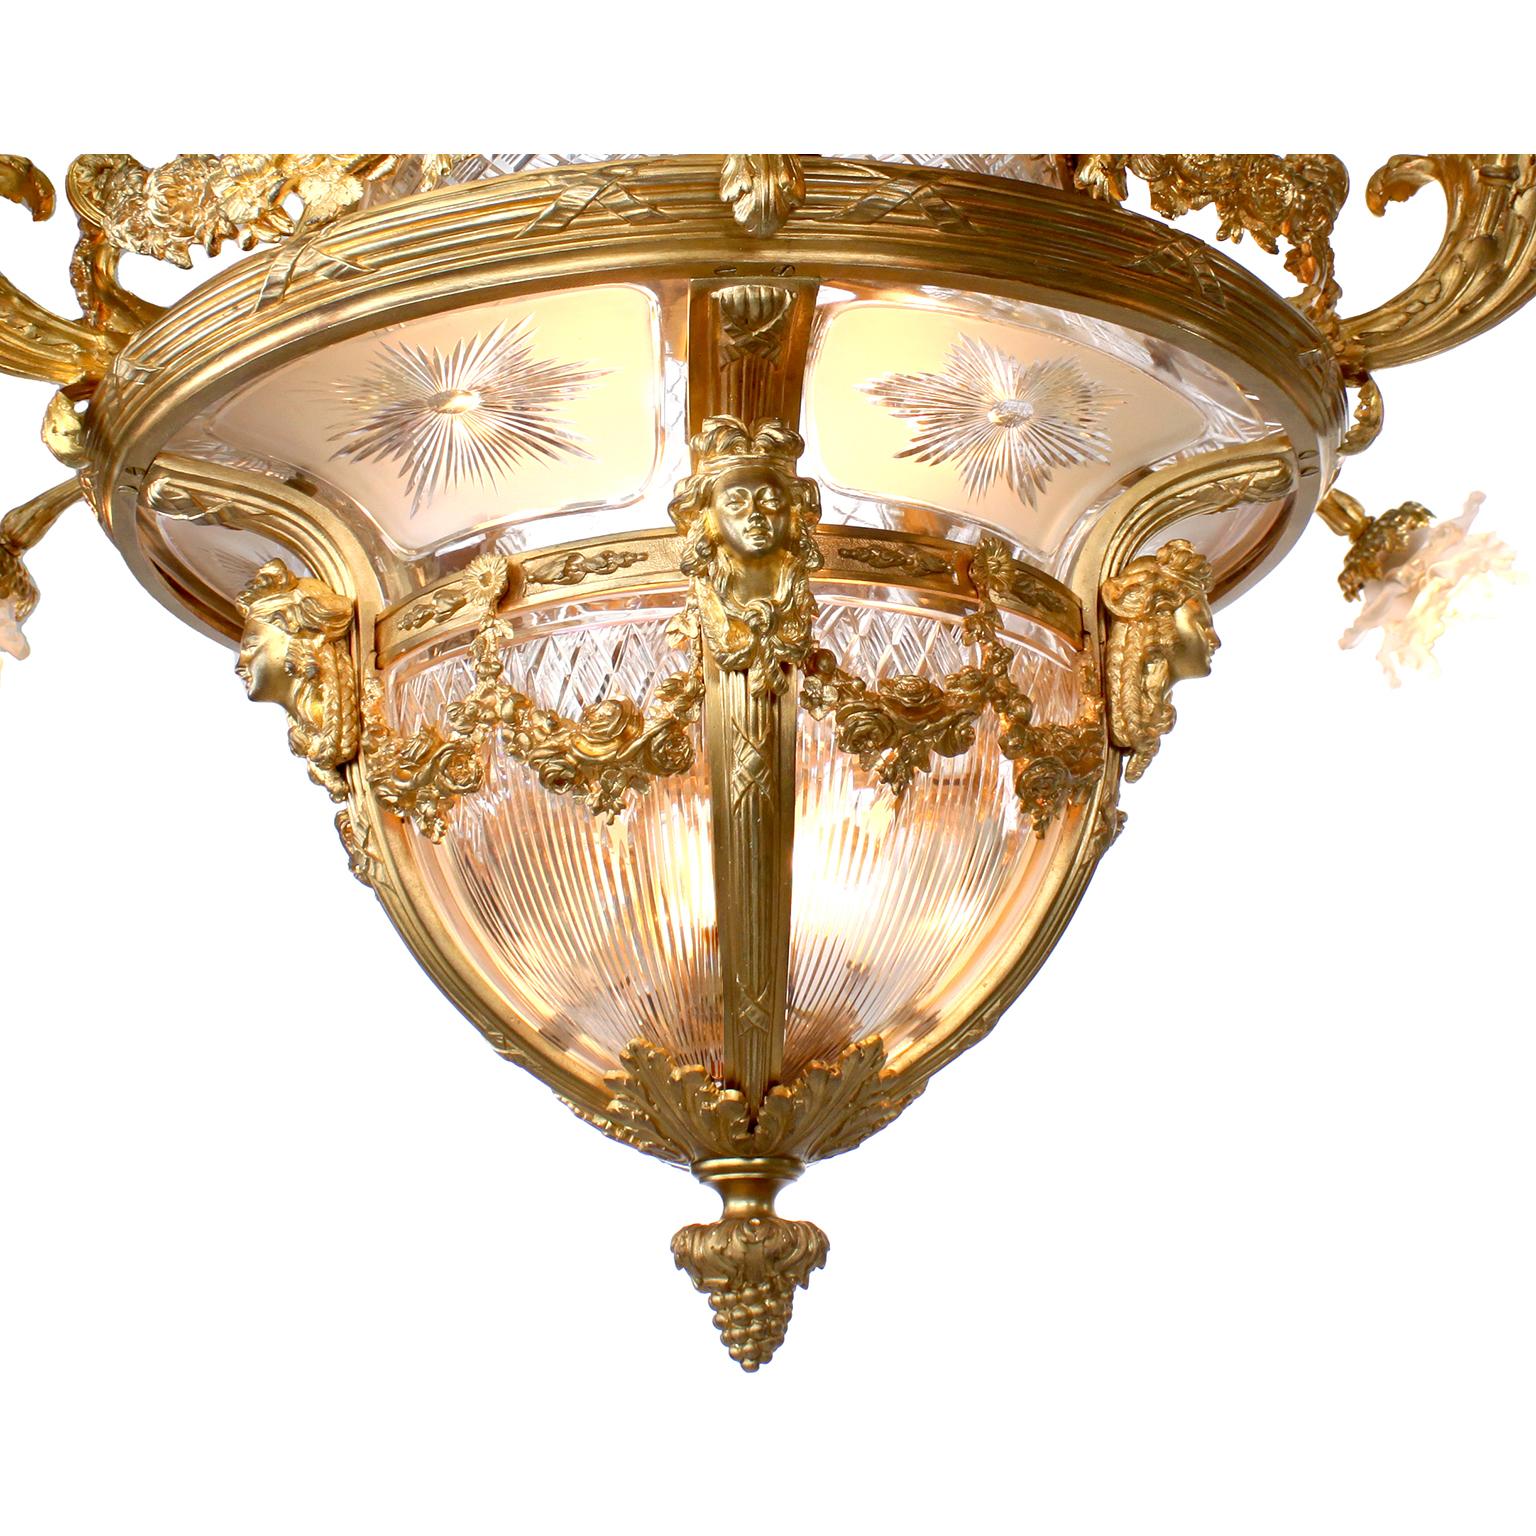 Fine French 19th-20th Century Louis XV Style Gilt Bronze and Baccarat Chandelier For Sale 6